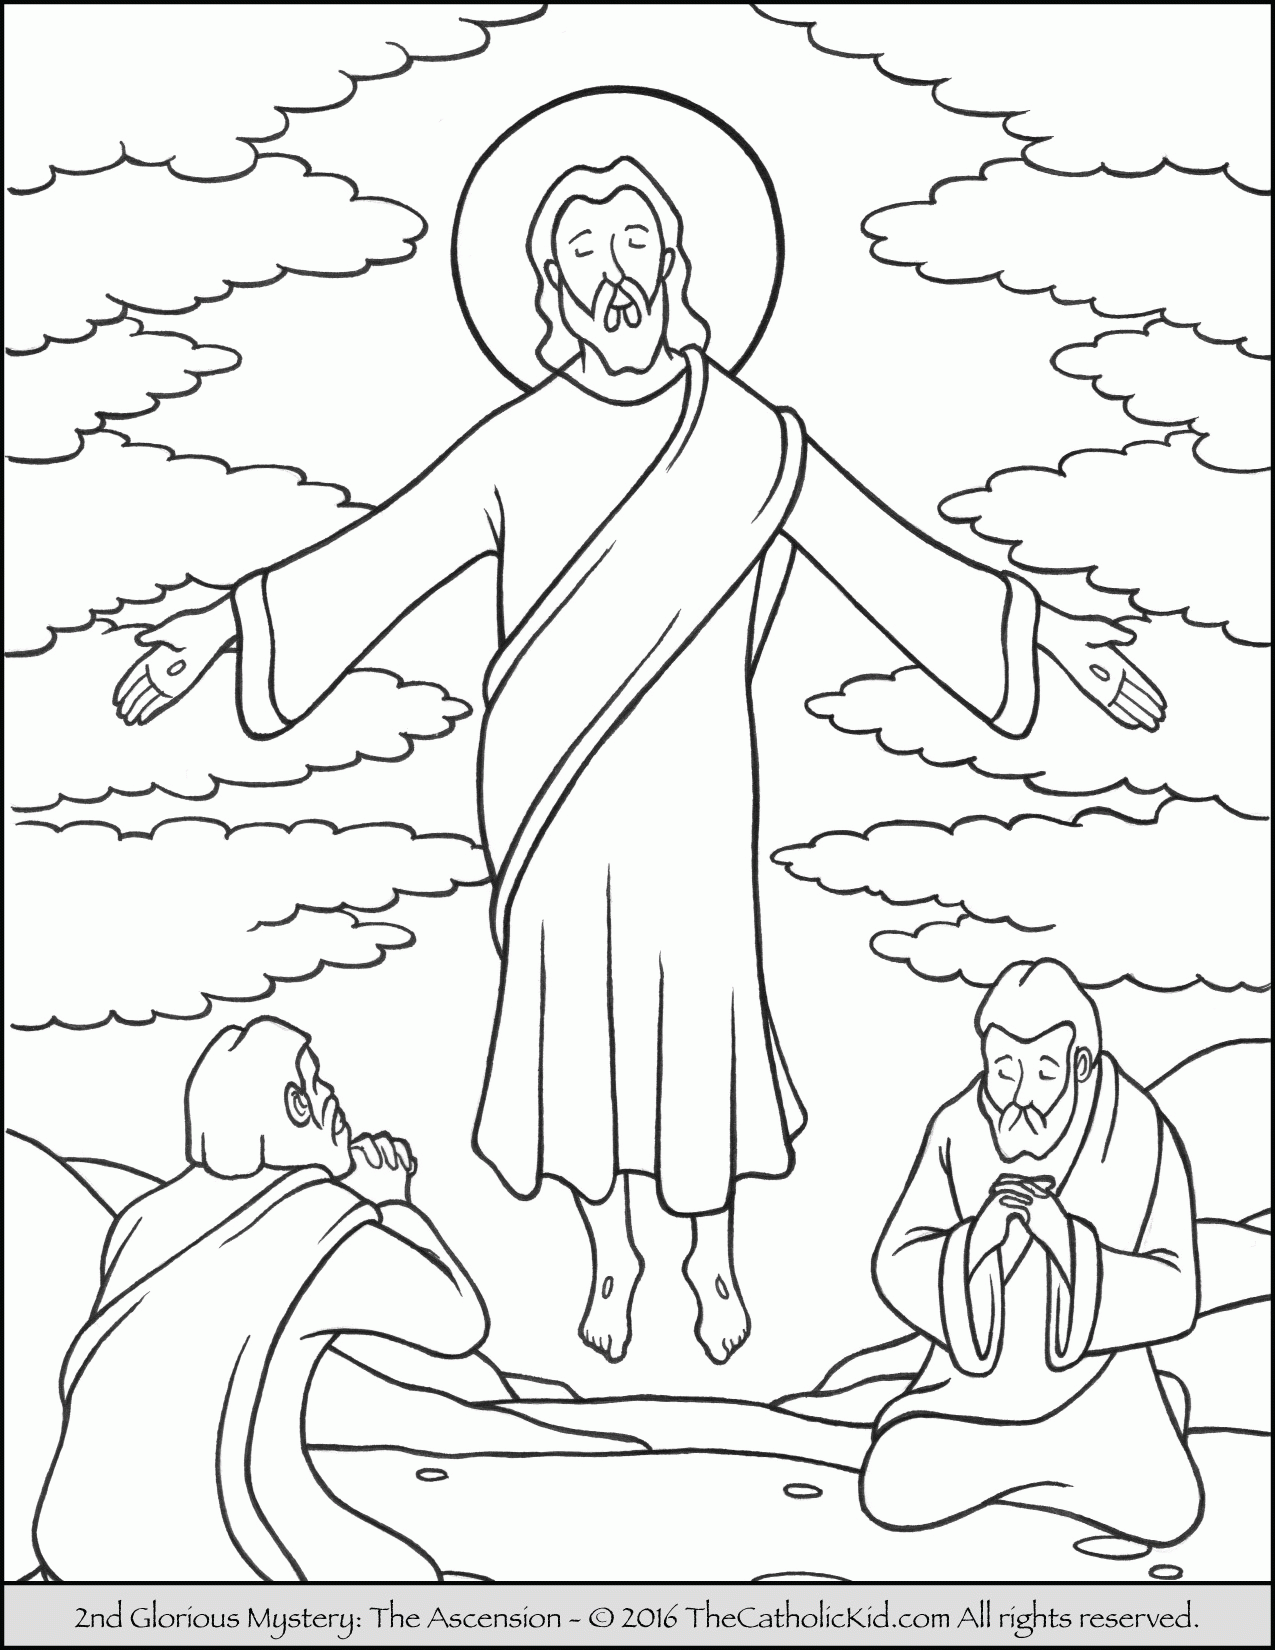 Feast of the Ascension of Our Lord Coloring Pages - The Catholic Kid